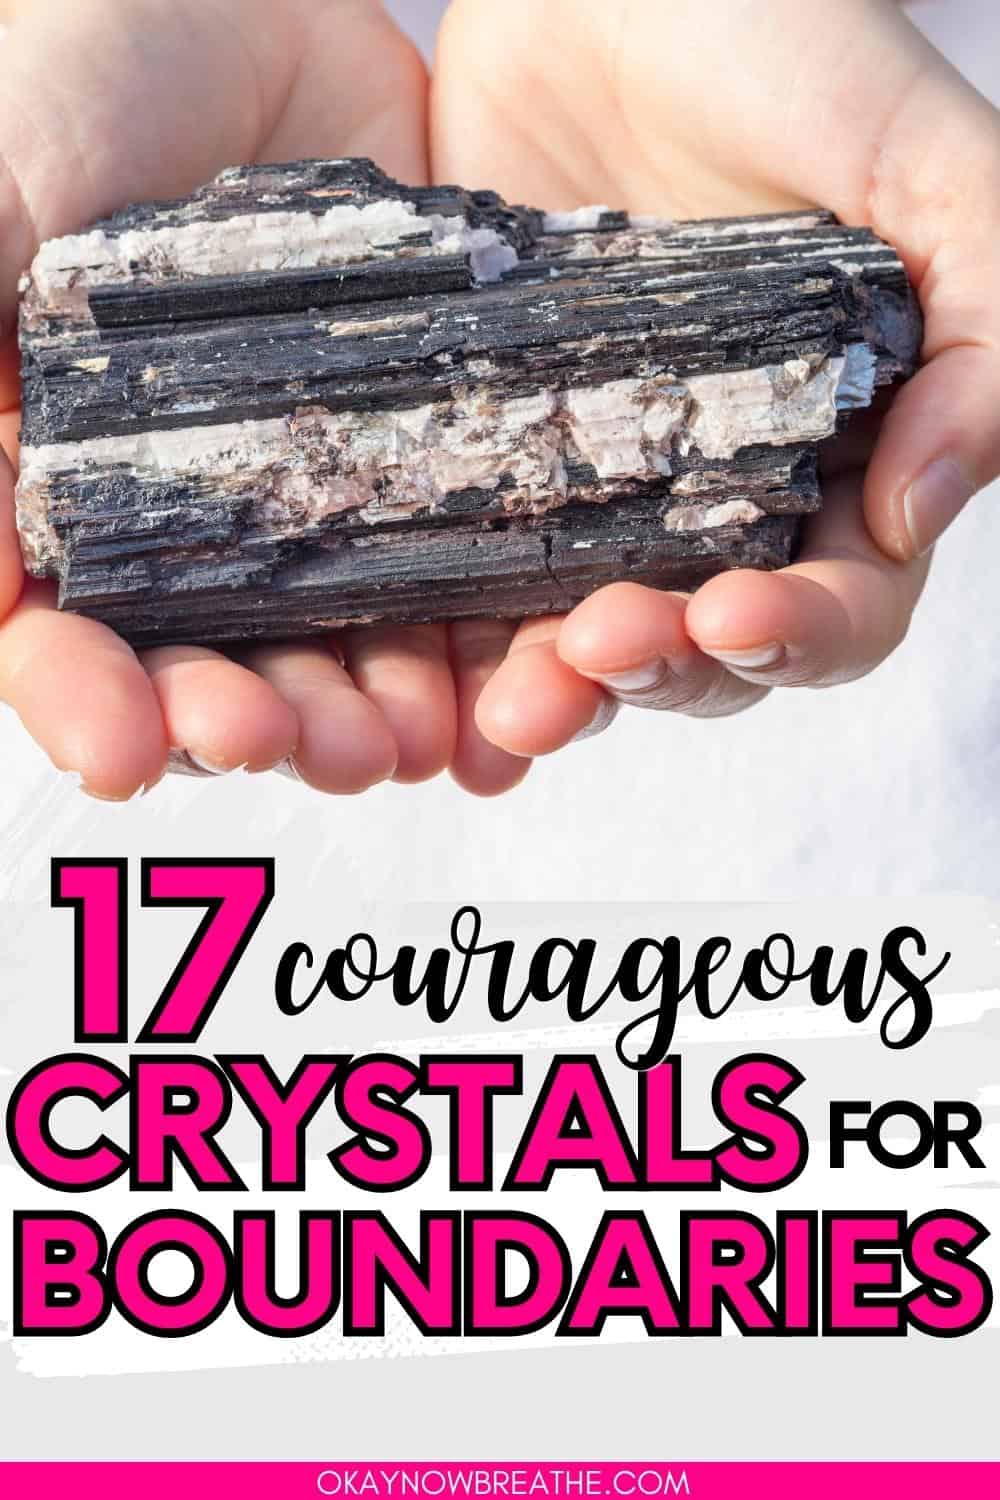 There are hands holding a large piece of black tourmaline. Below, there is text: 17 courageous crystals for boundaries.